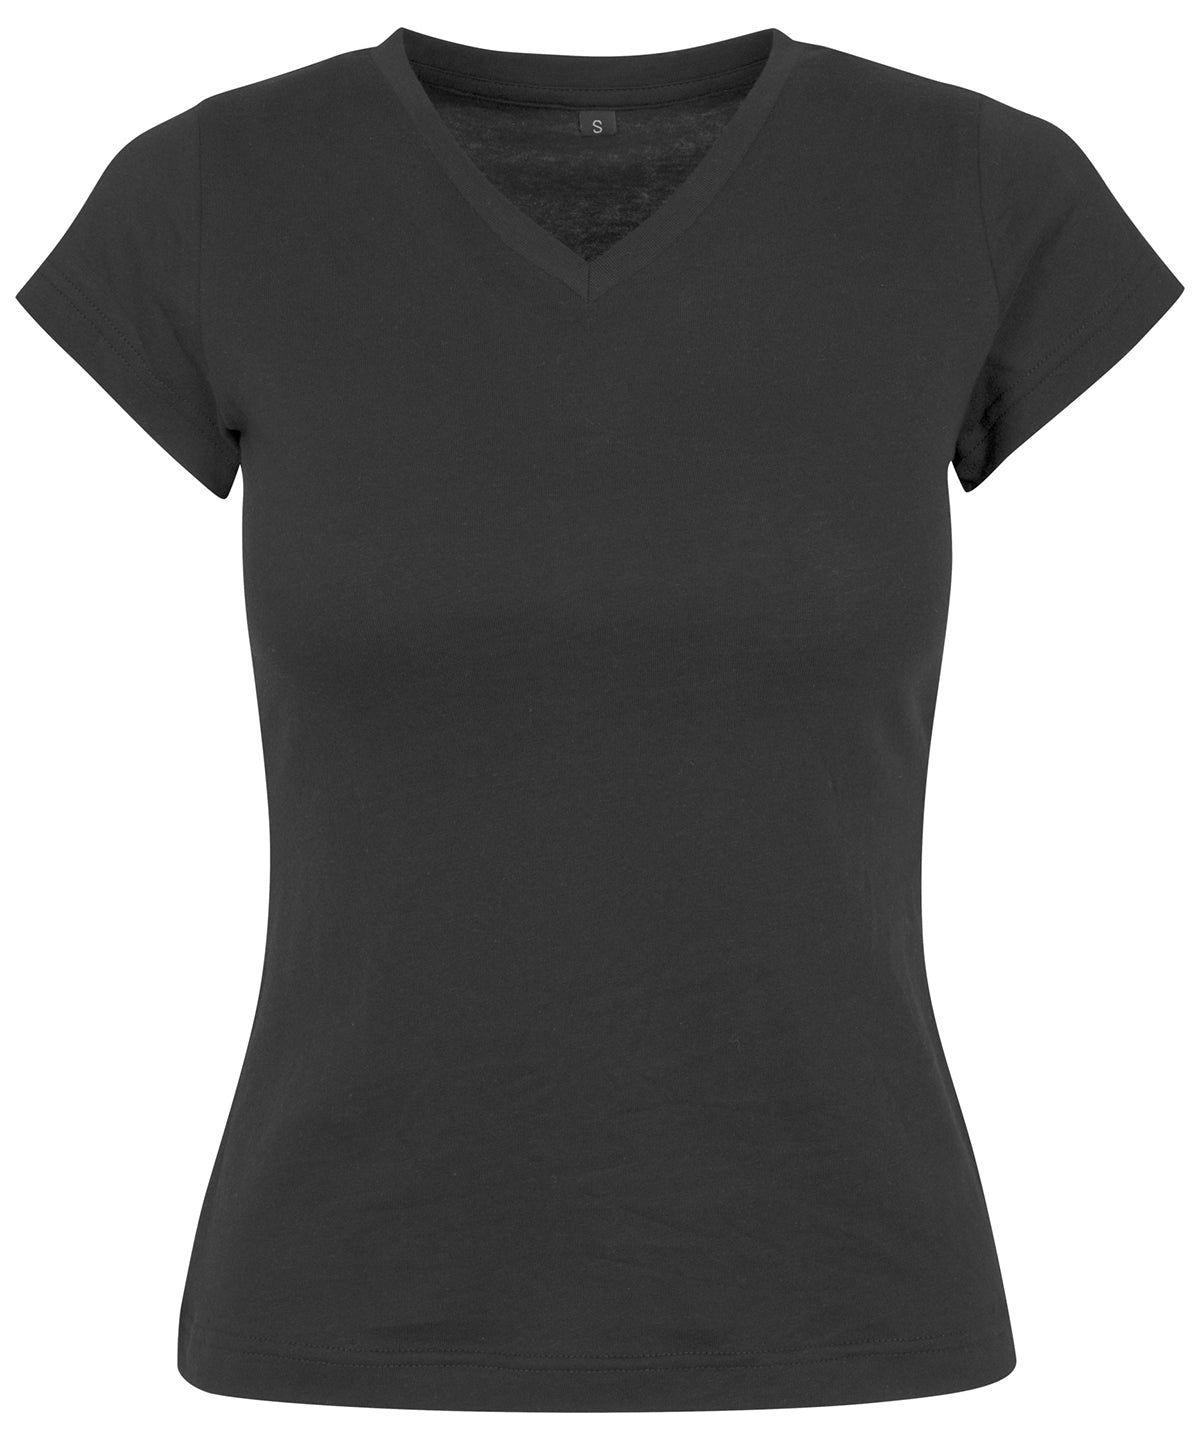 Personalised T-Shirts - Black Build Your Brand Women's basic tee